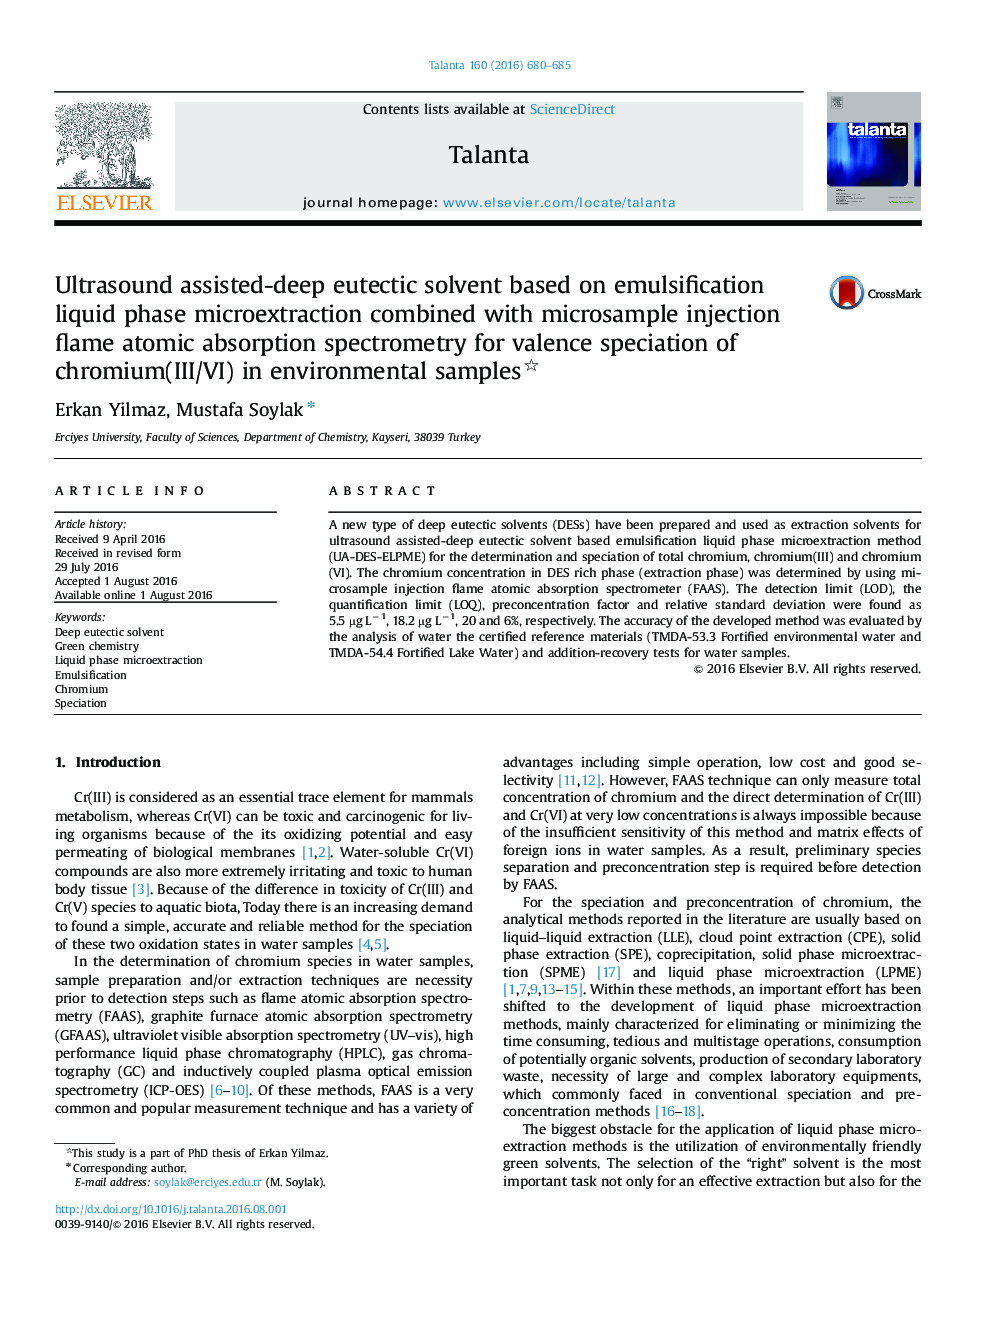 Ultrasound assisted-deep eutectic solvent based on emulsification liquid phase microextraction combined with microsample injection flame atomic absorption spectrometry for valence speciation of chromium(III/VI) in environmental samples 